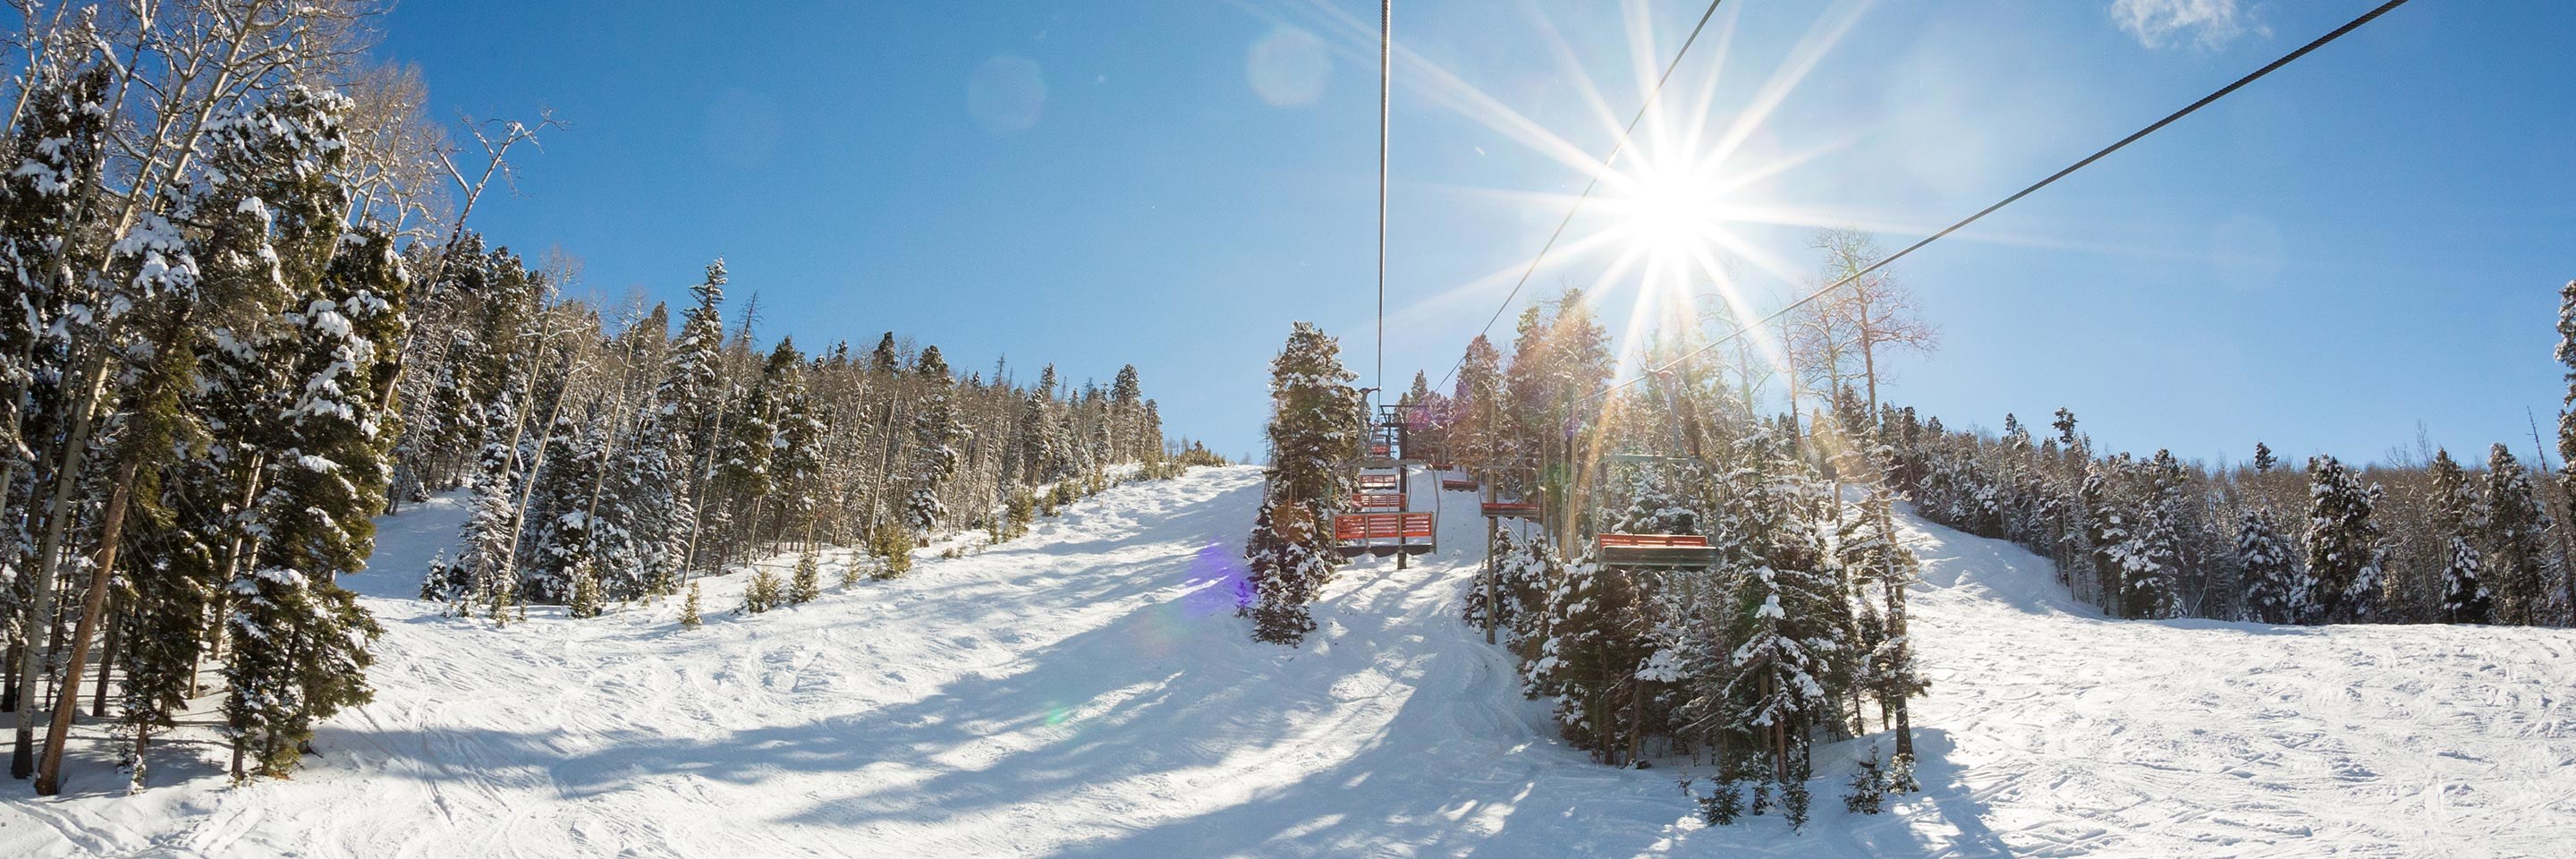 Chair Lifts in Winter at Red River - best ski area in New Mexico